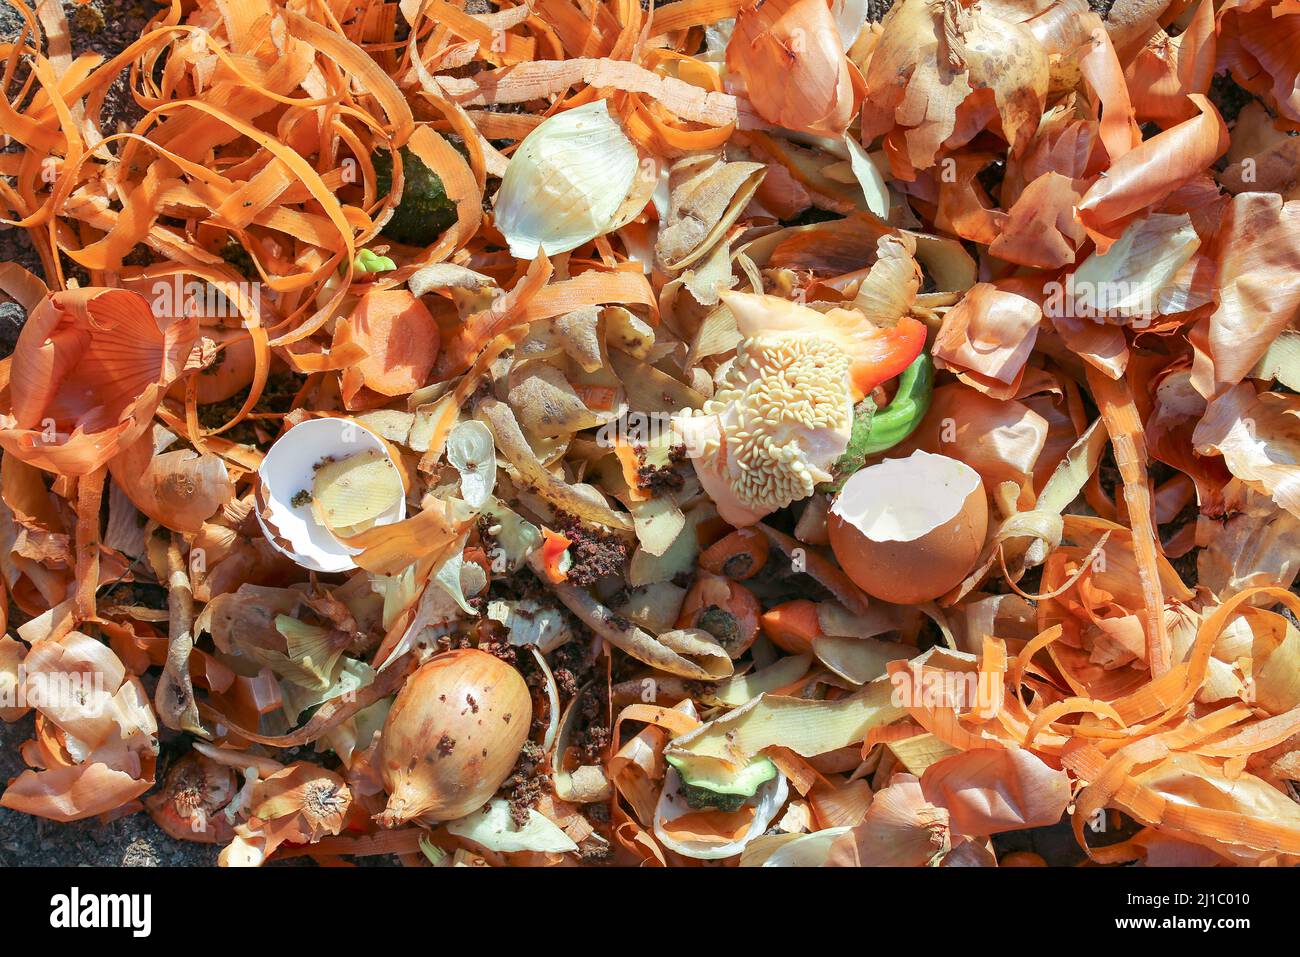 Raw kitchen waste for composting Stock Photo